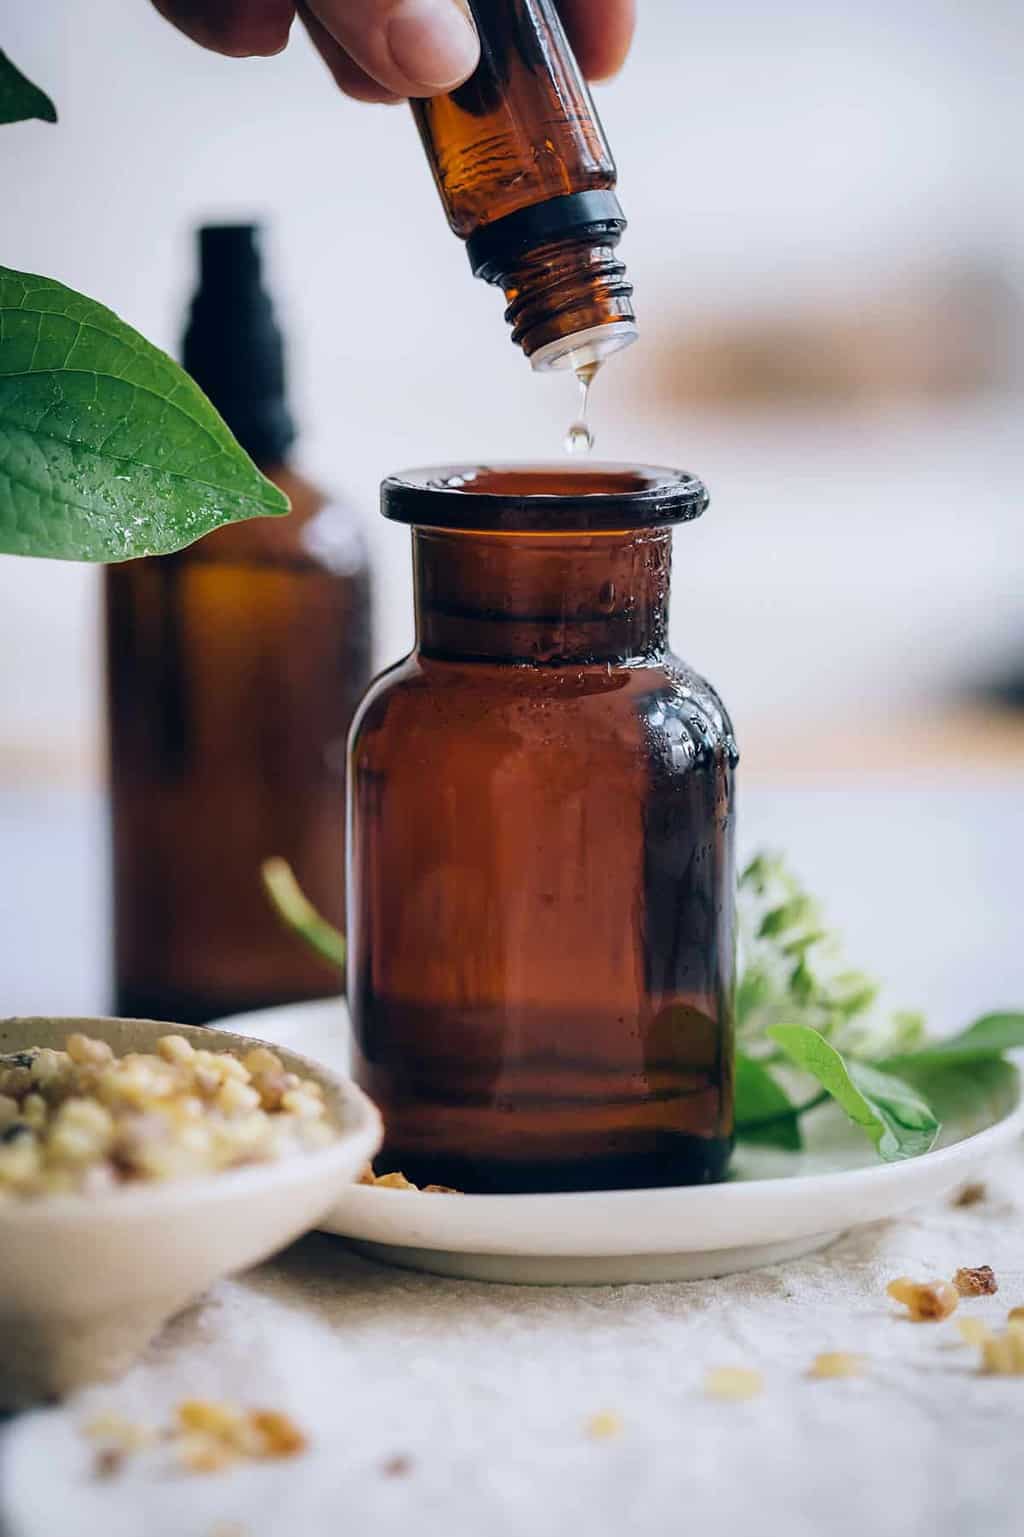 The Best Ways To Use Frankincense Oil on Your Face